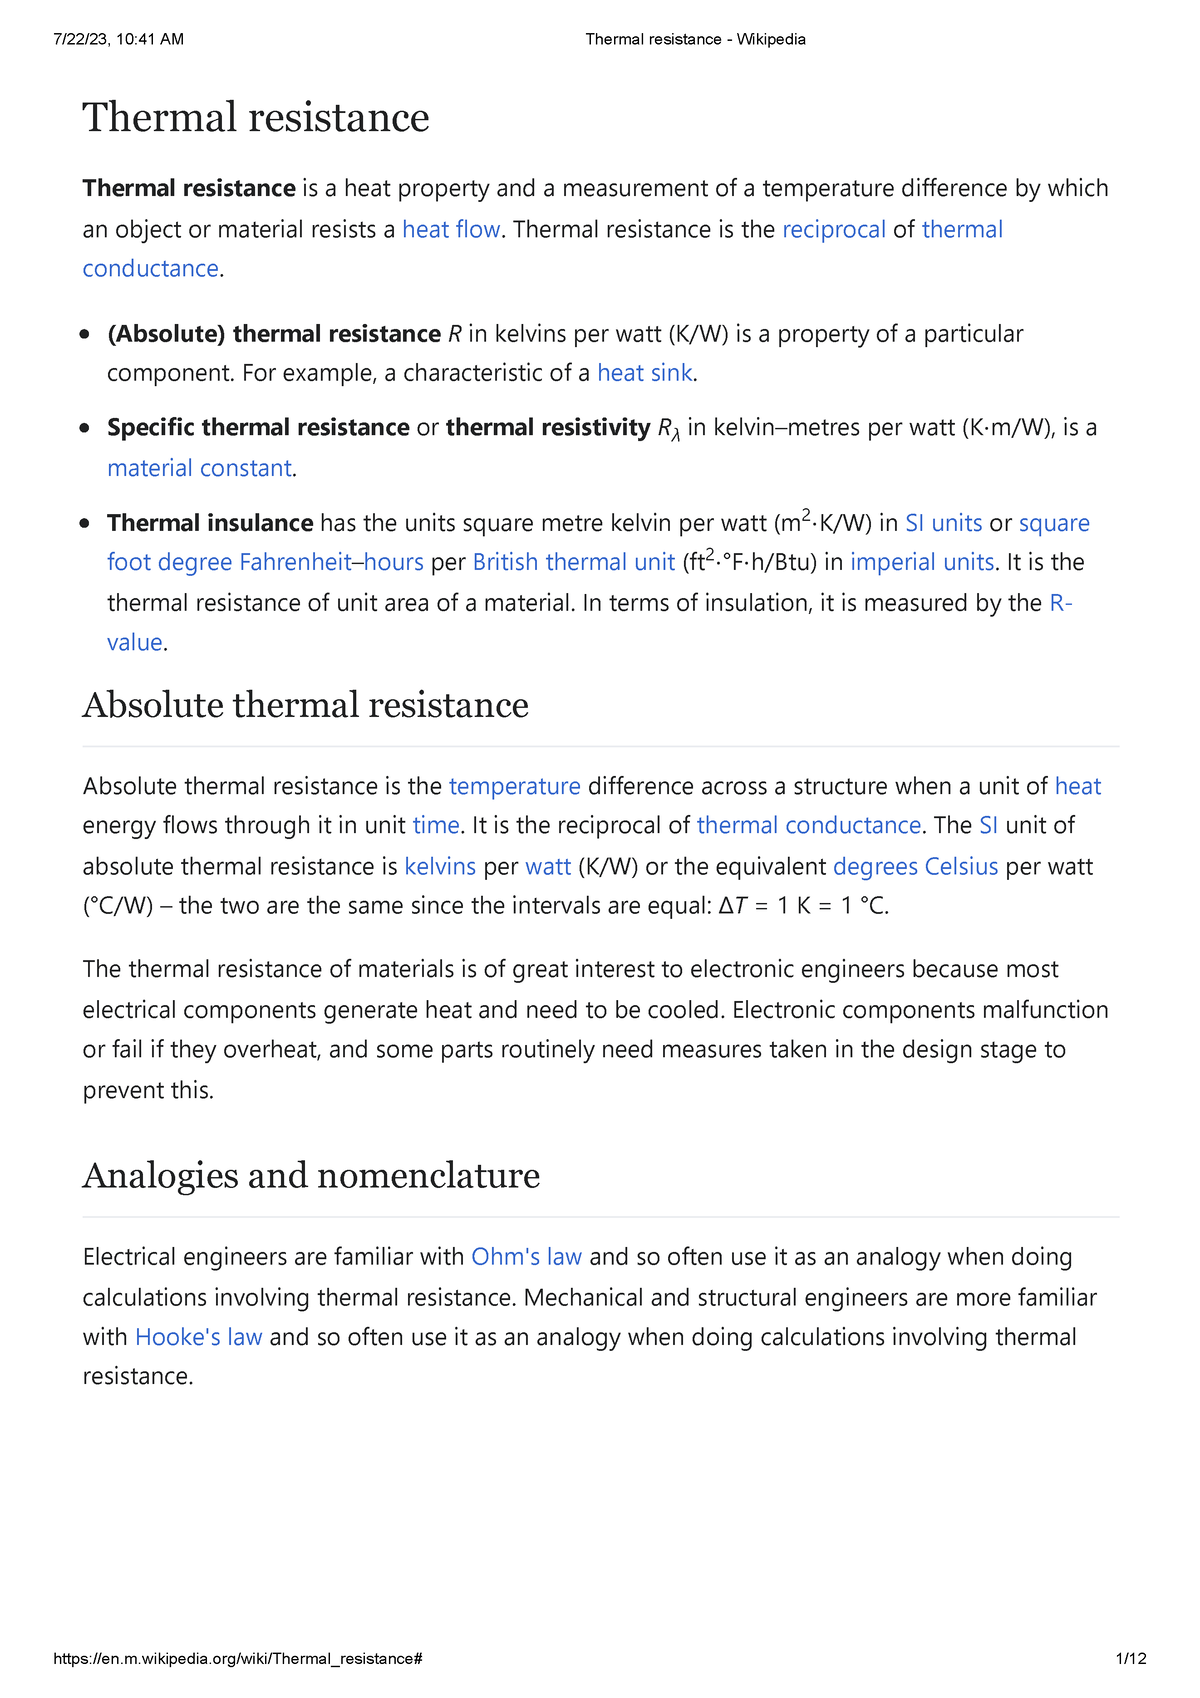 Thermal resistance - Wikipedia - Thermal resistance Thermal resistance ...